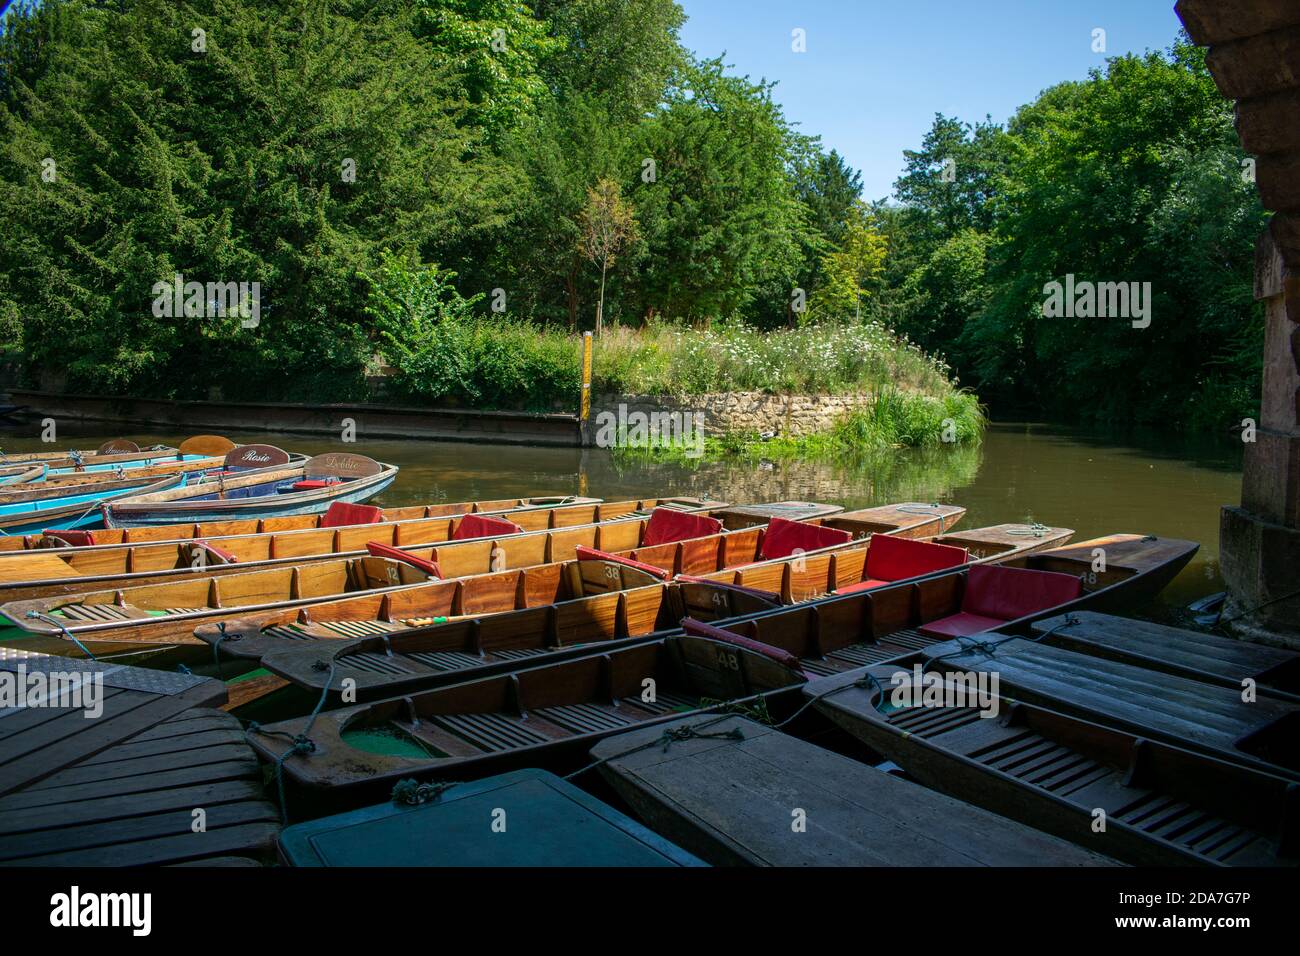 Punting boats by Magdalen Bridge Boathouse on river Cherwell in Oxford, many boats docked together in rows. Bright and colorfull group of long boats Stock Photo